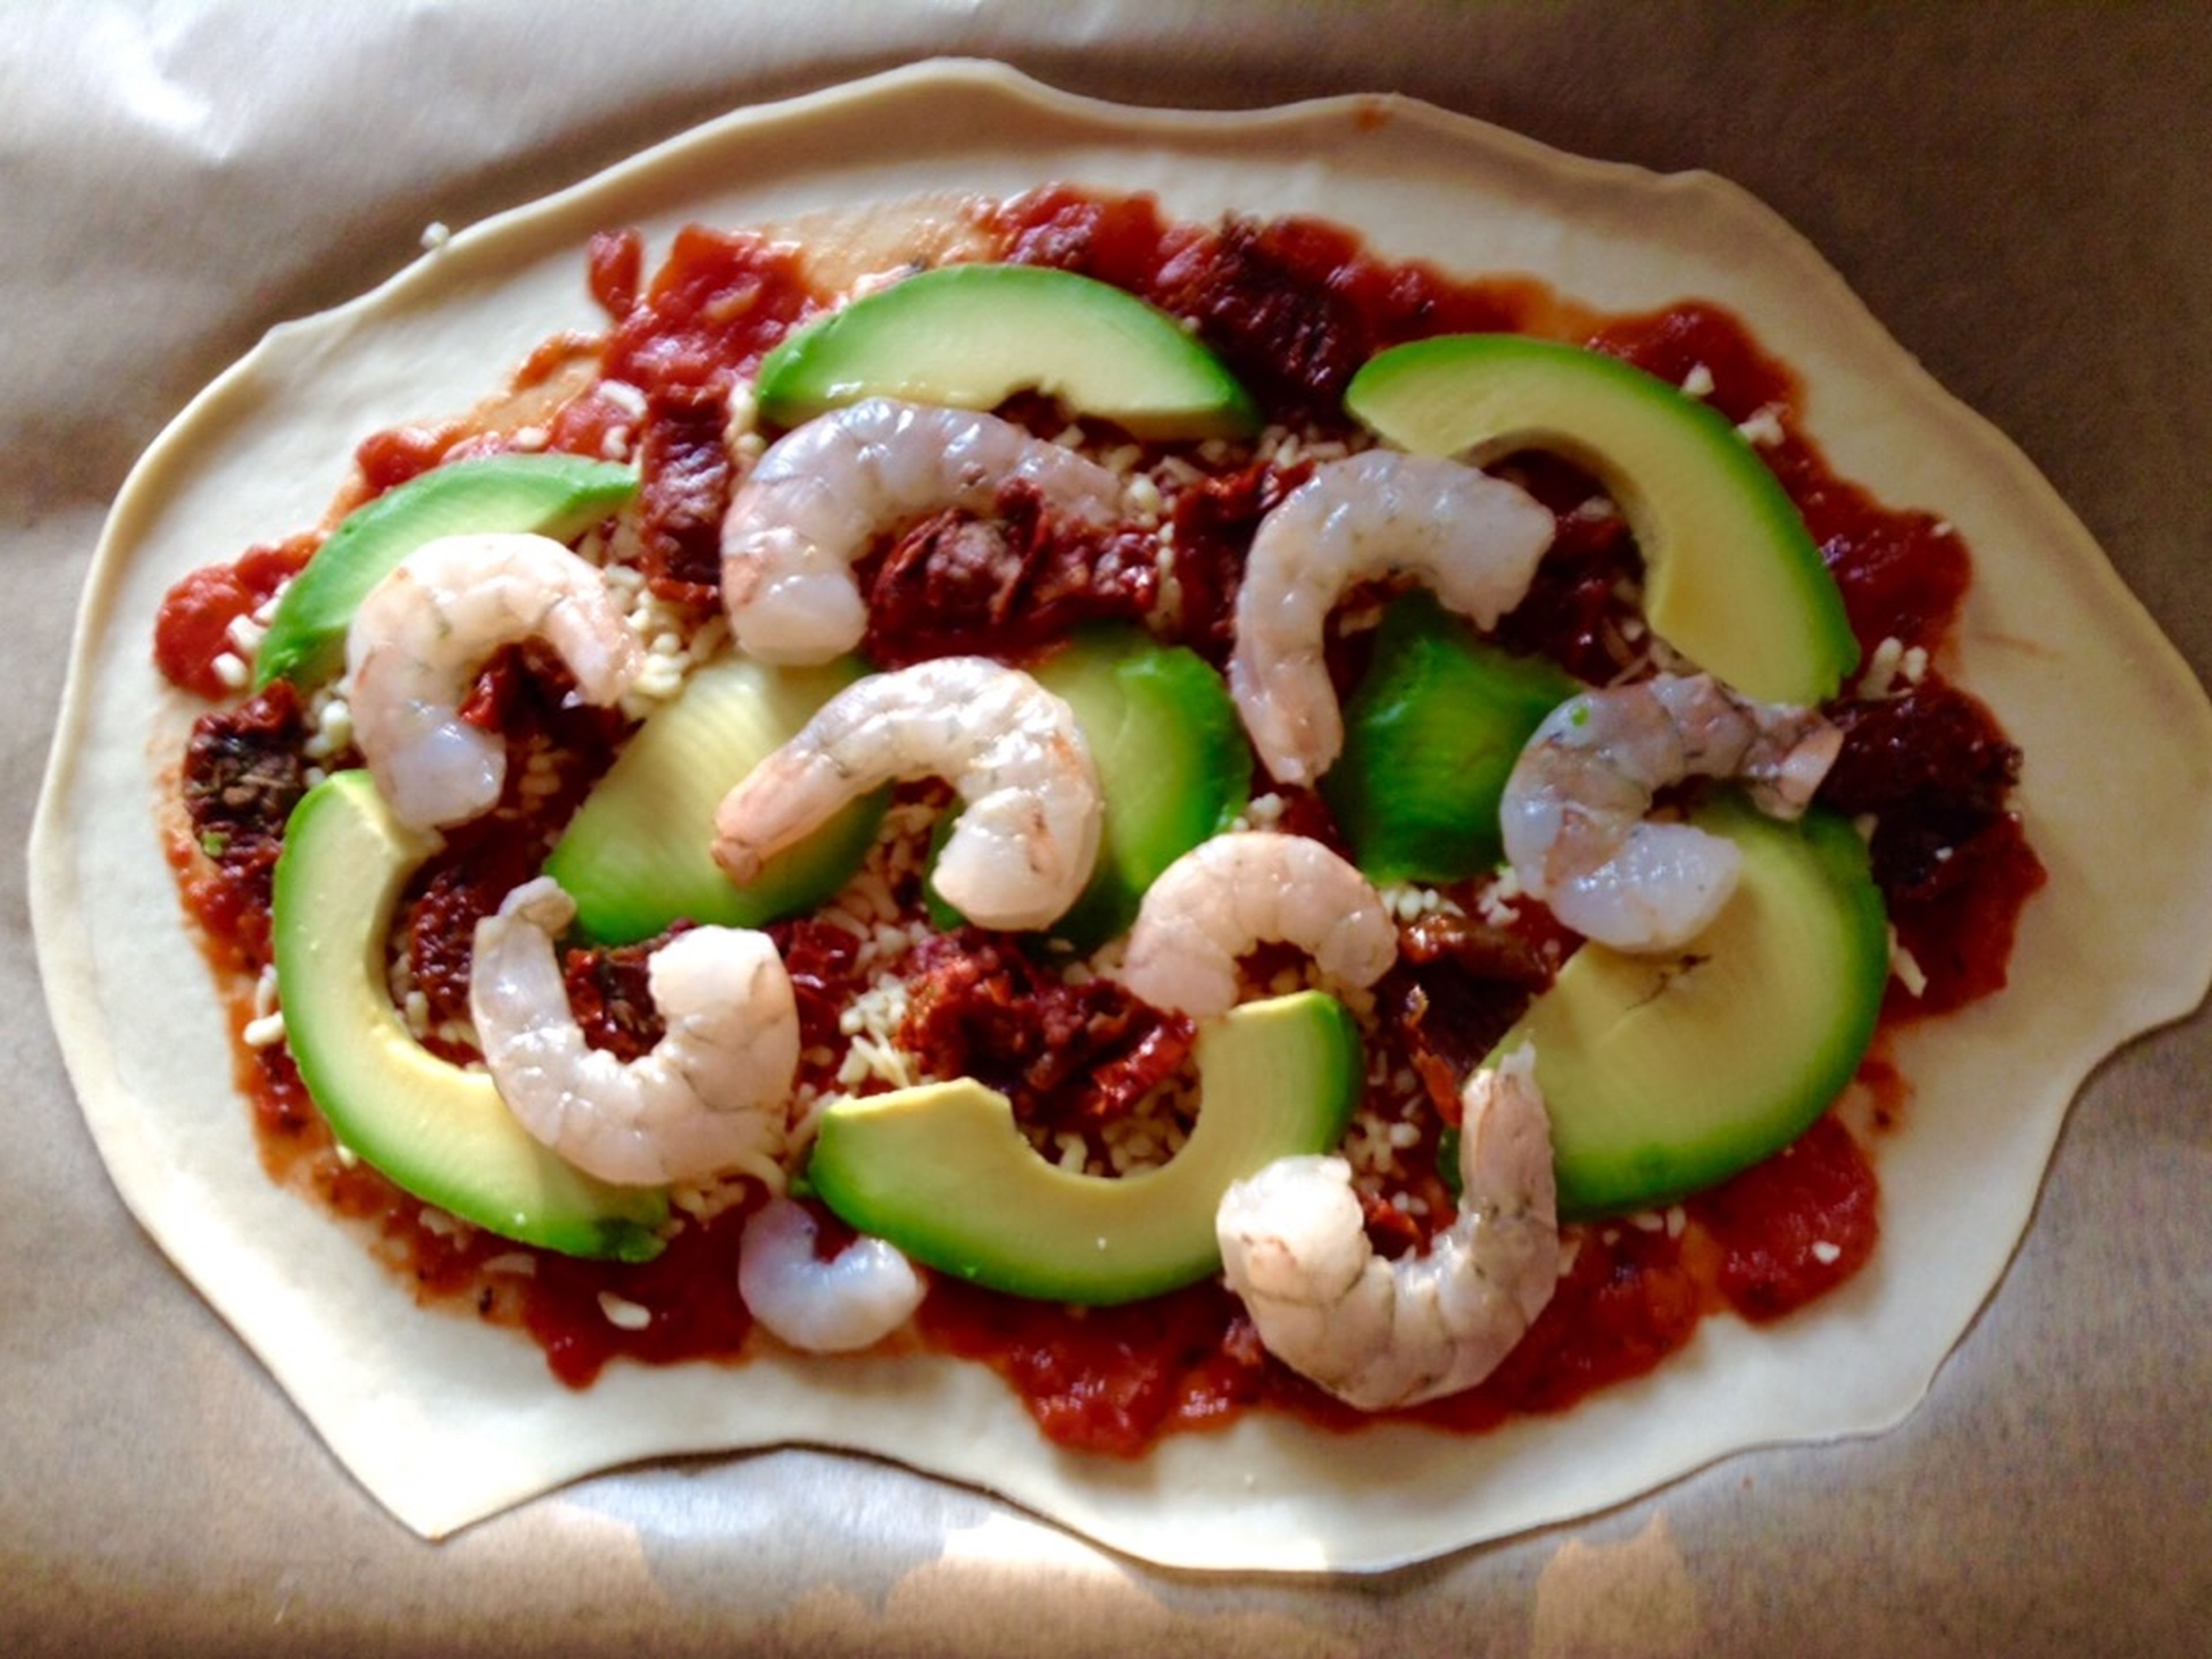 Next, add the toppings. Either put everything on top randomly, or decorate your pizza creatively, as you know—you eat with your eyes first! I started with the avocado (sliced in advance), followed by shrimp (peeled and cleaned beforehand), and finished off with chopped sun-dried tomatoes in the gaps.